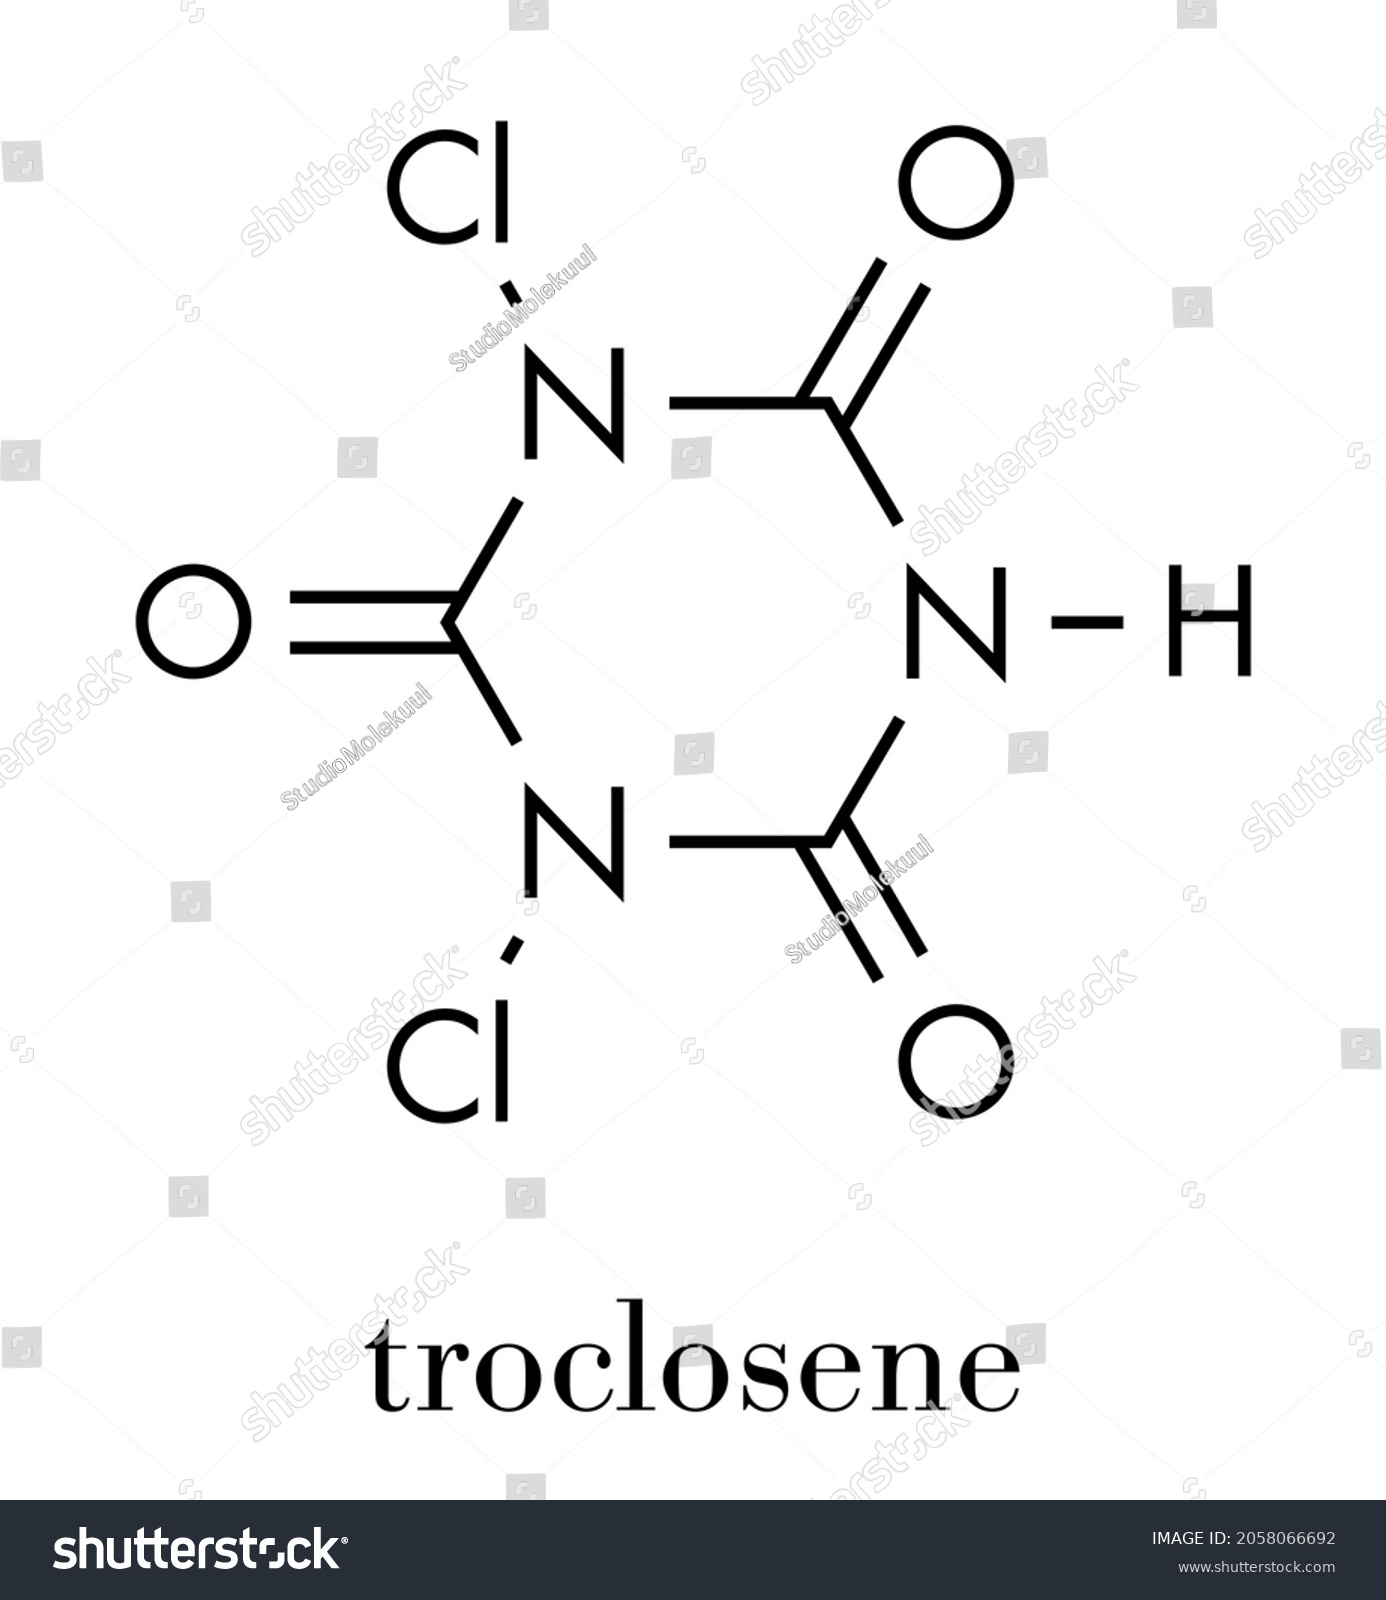 SVG of Troclosene (dichloroisocyanuric acid) molecule. Used as disinfectant, deodorant, biocide, detergent and in water purification. Skeletal formula. svg